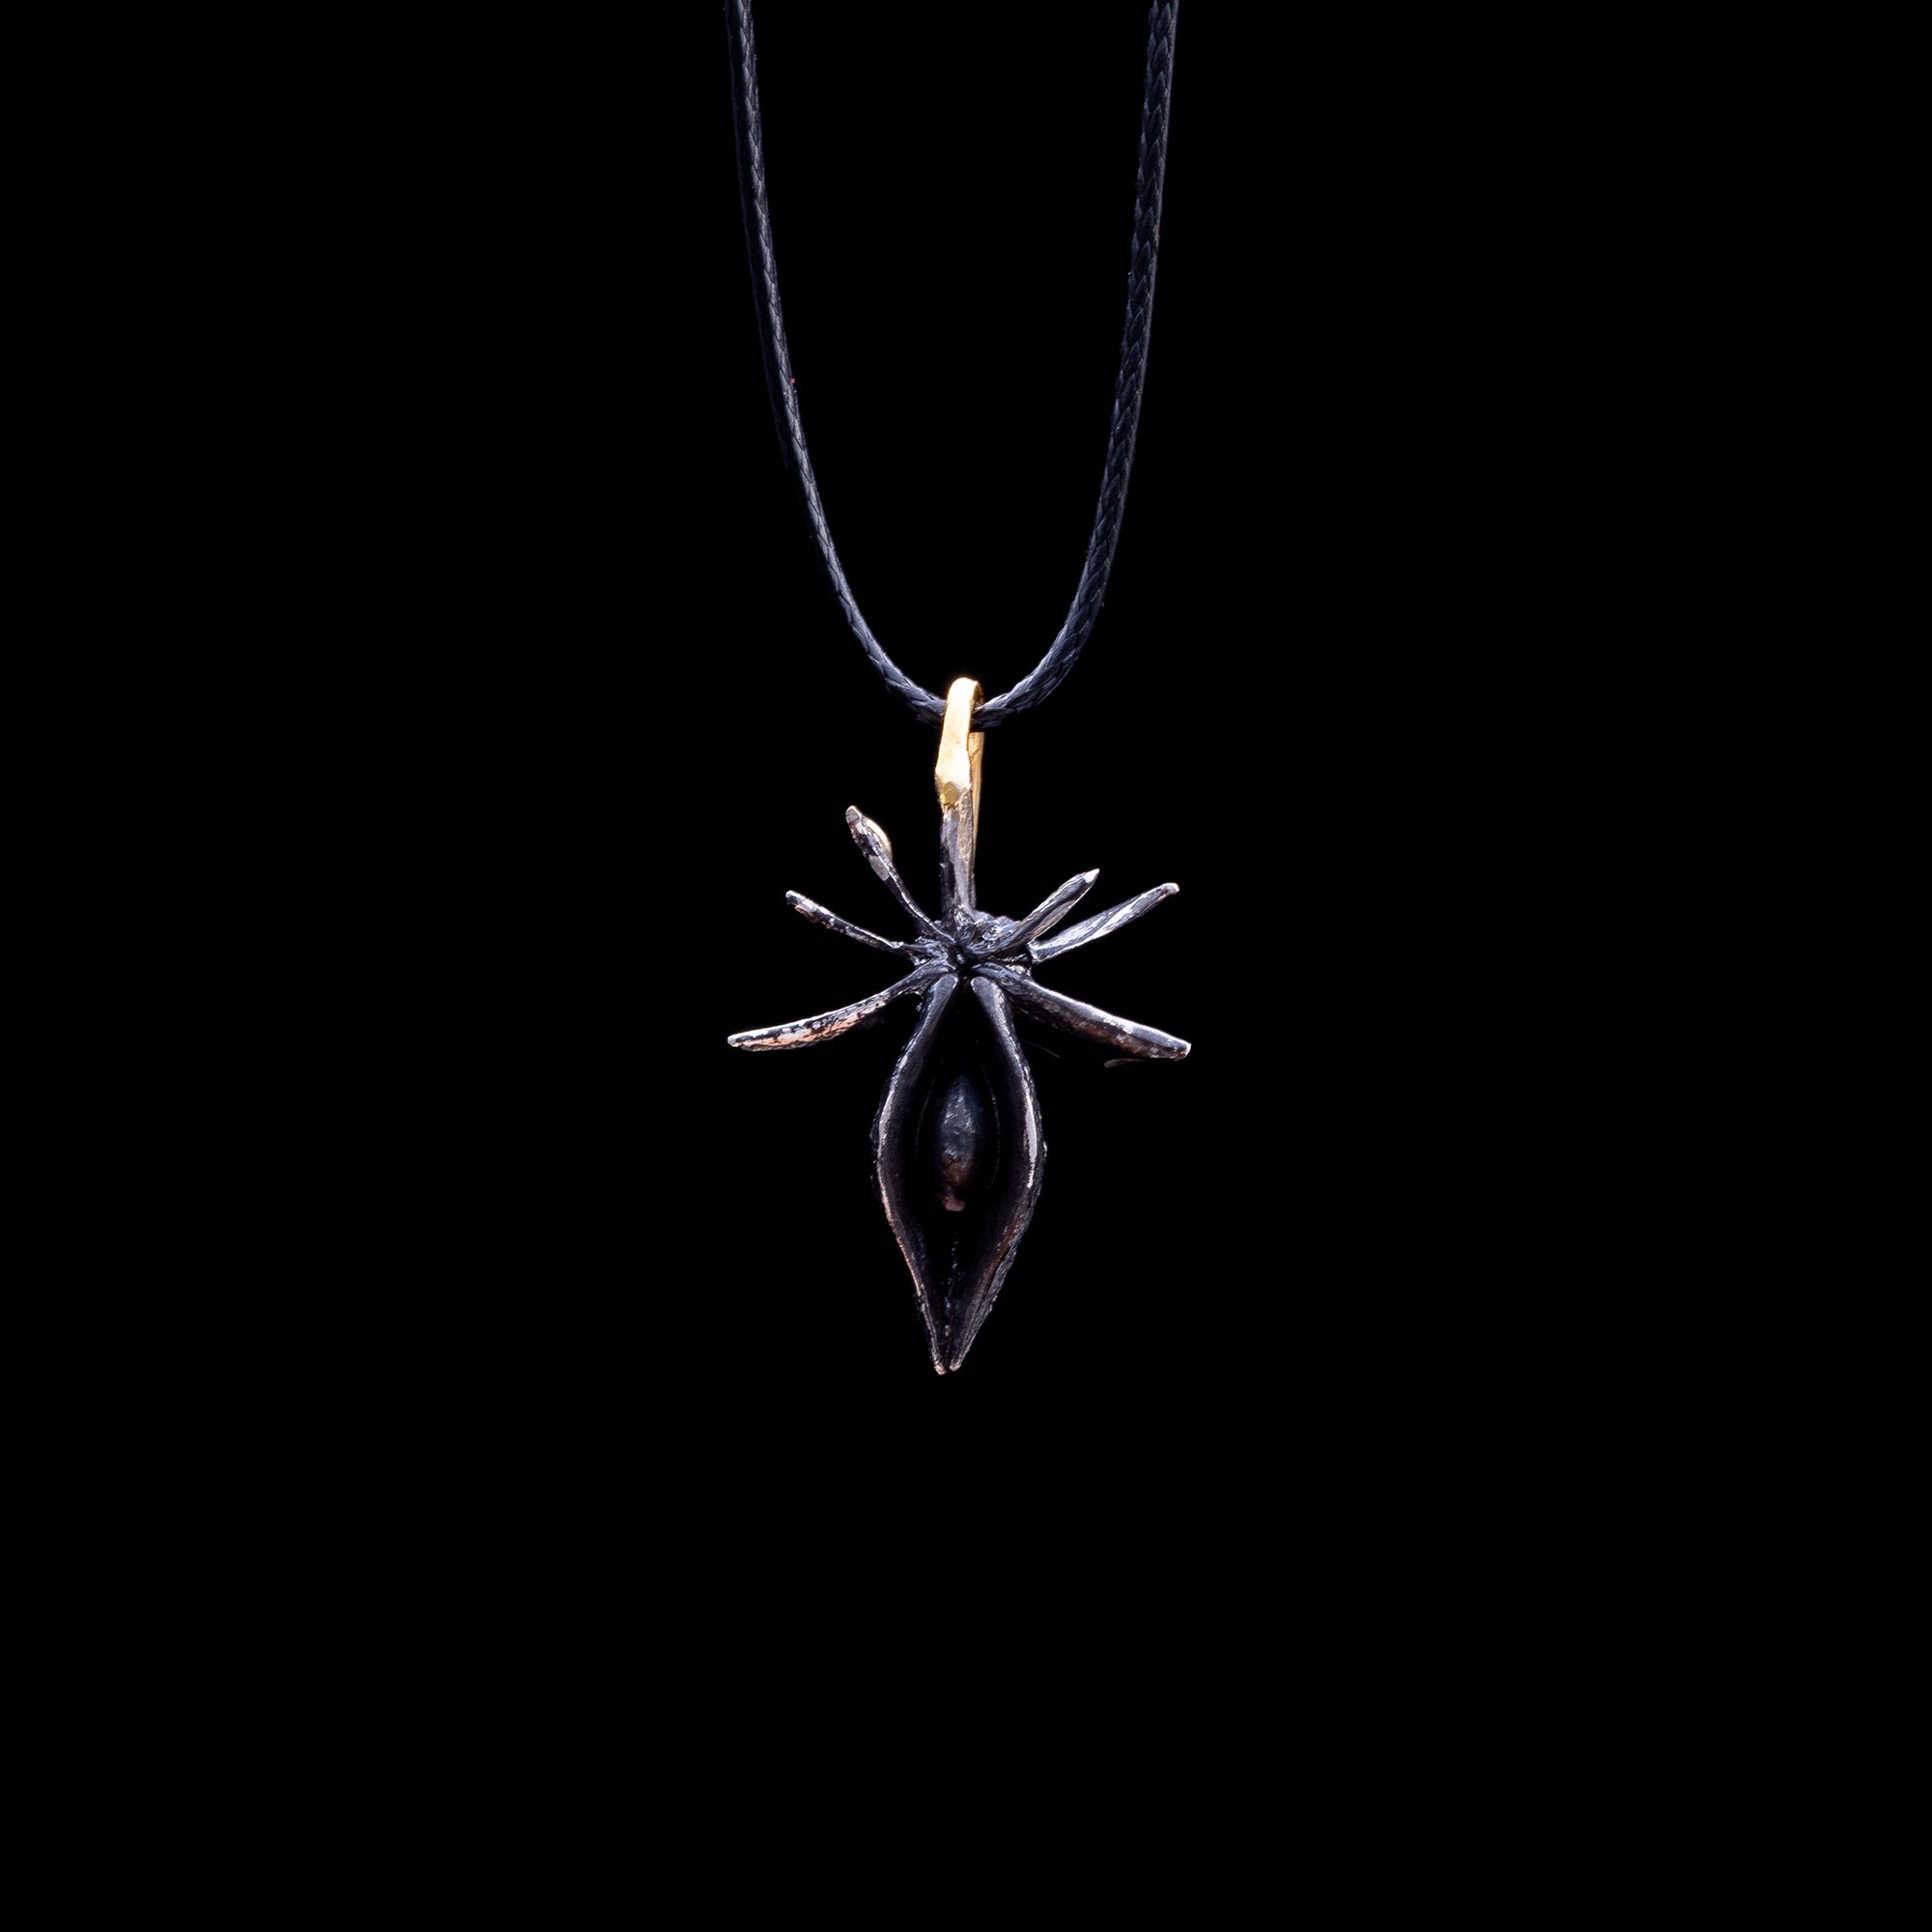 Star Anise Seed Pendant